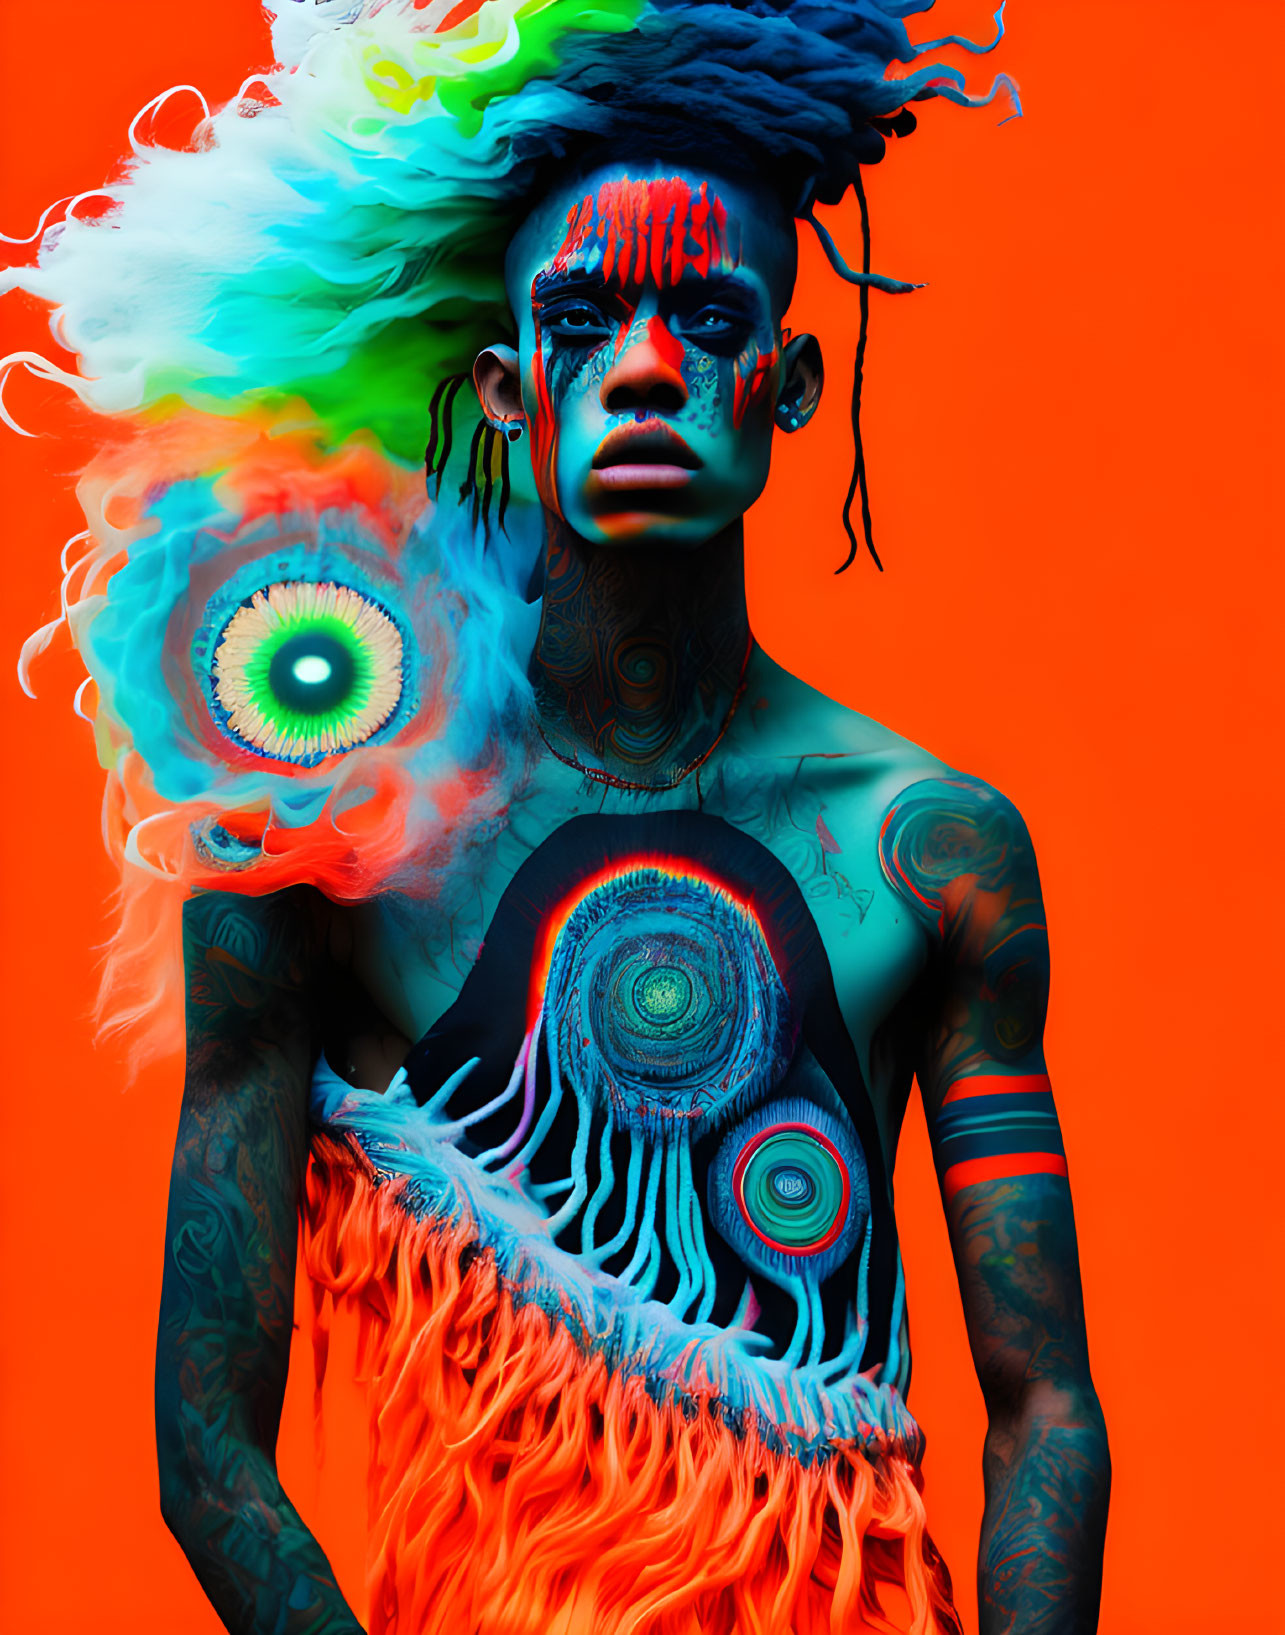 Vibrant body paint and tattoos on person against orange background with colorful smoke and eye patterns